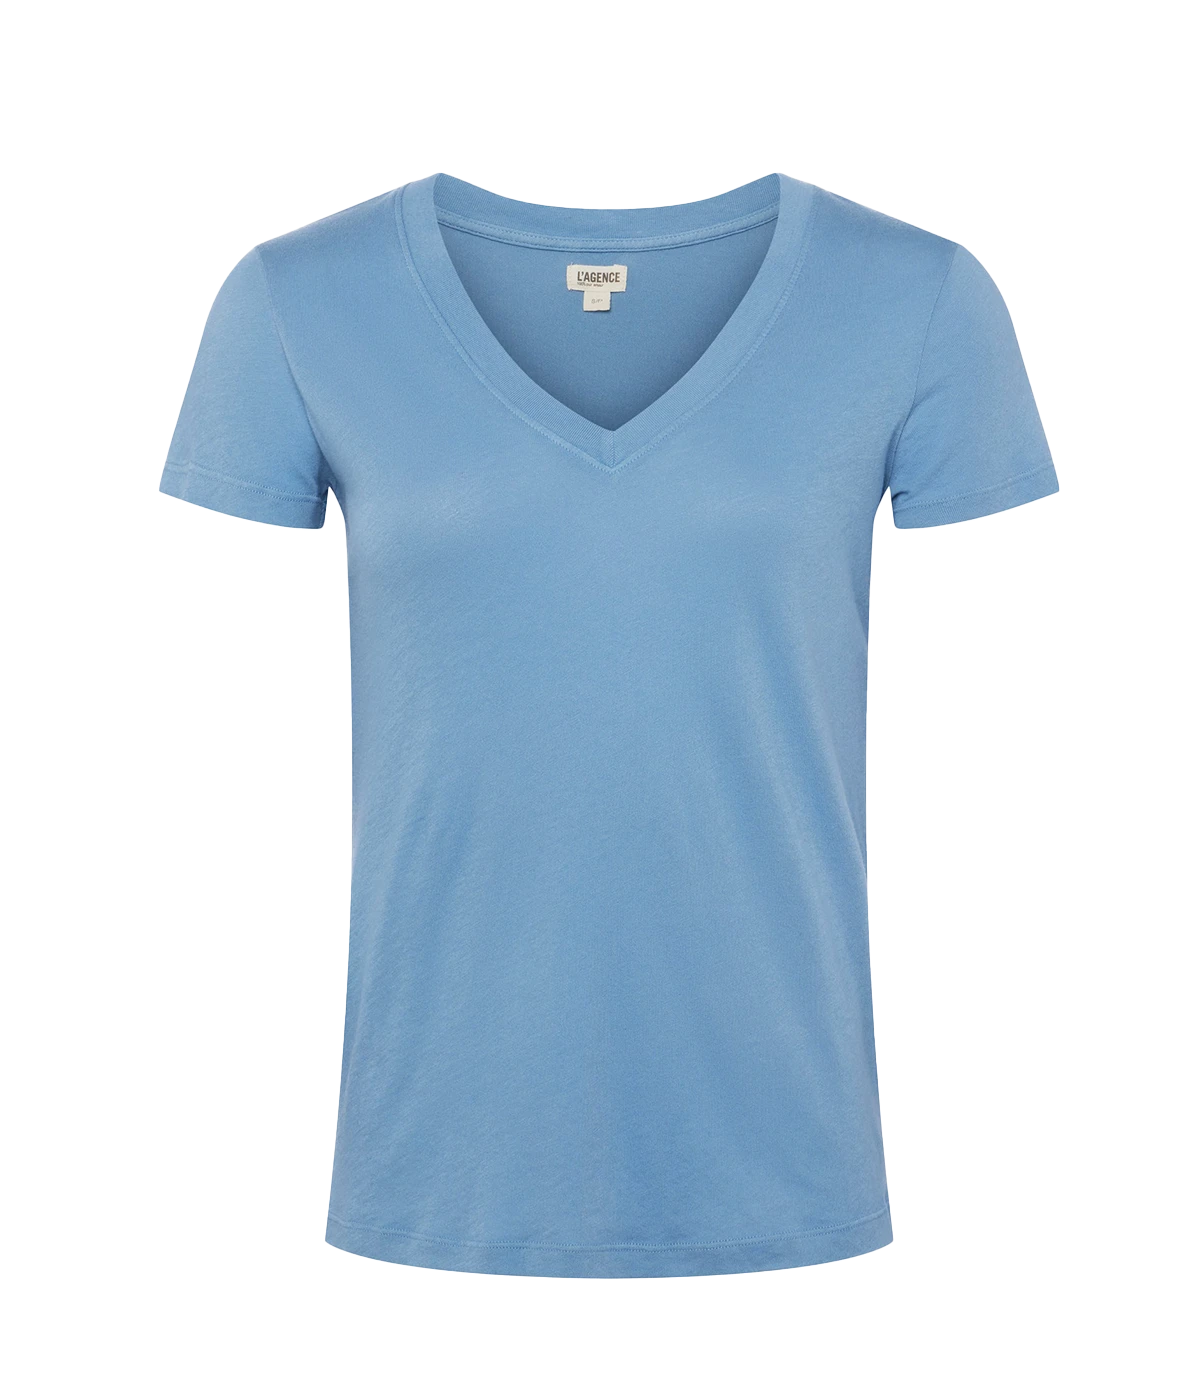 blue 100% V neck cotton t-shirt by l'agence. wash & wear and br-freindly